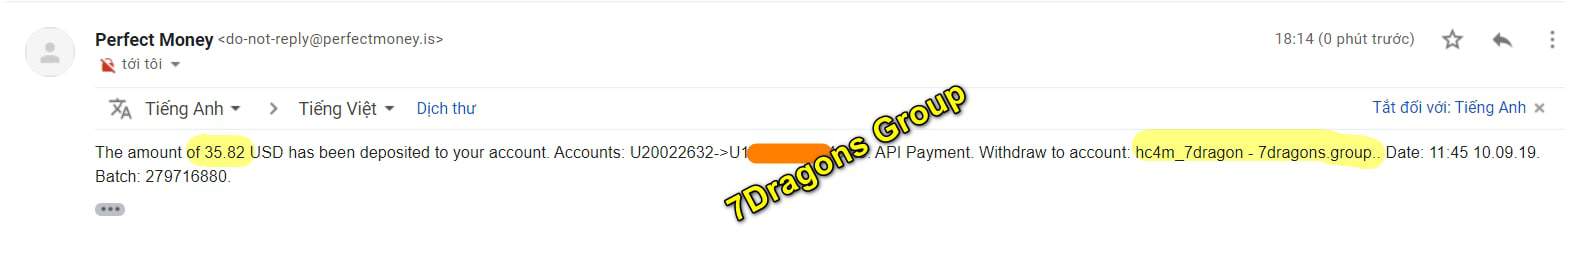 7dragons group 1009 - [SCAM] HYIP - 7Dragons Group Review: Profit 1.7% per day for 30 working days